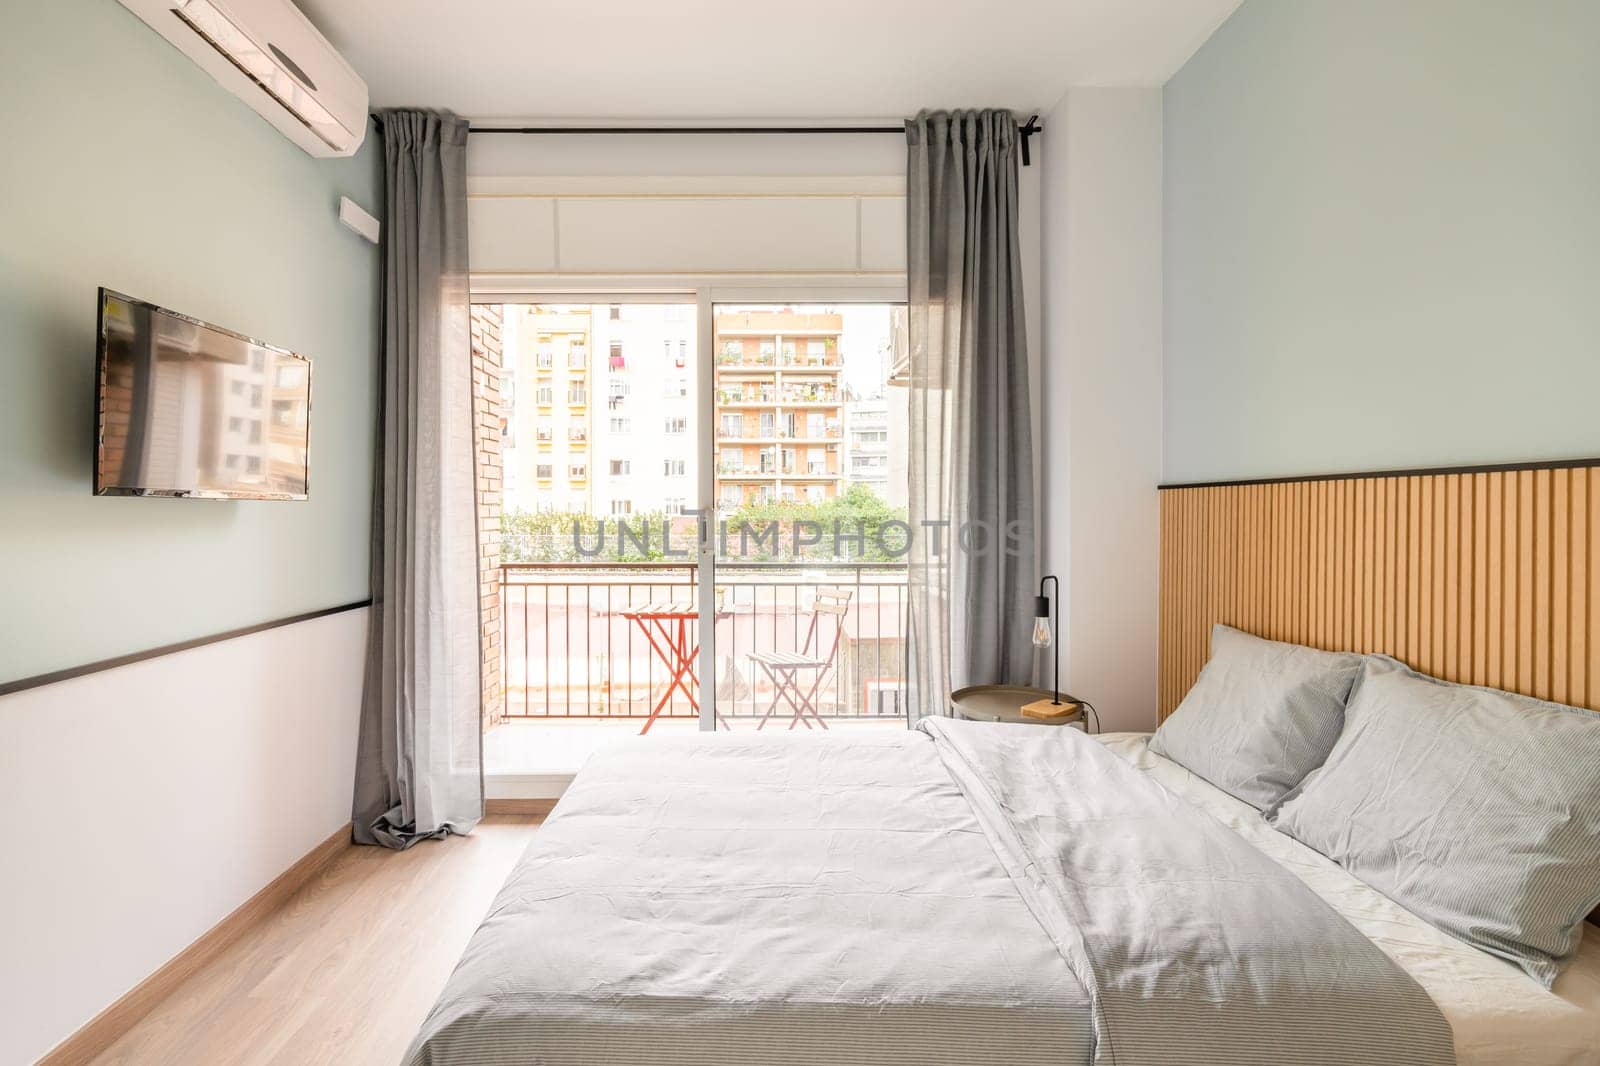 Spacious bright room with bed, large opening on entire wall with sliding plastic doors and access to balcony. Room has table with chair, air conditioning and TV for pleasant leisure. by apavlin